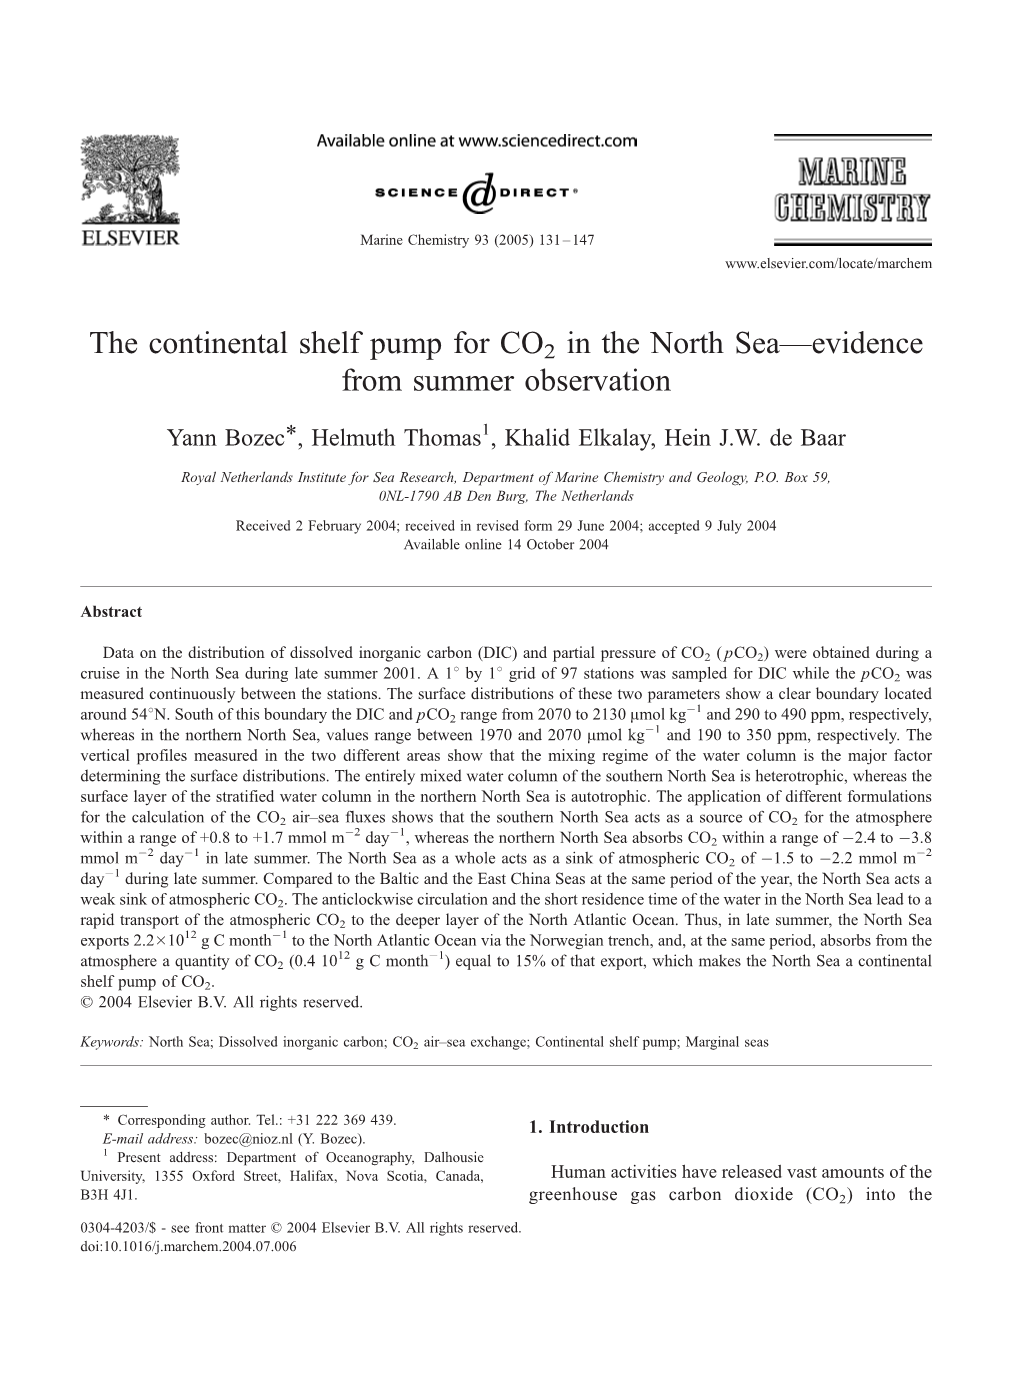 The Continental Shelf Pump for CO2 in the North Sea—Evidence from Summer Observation